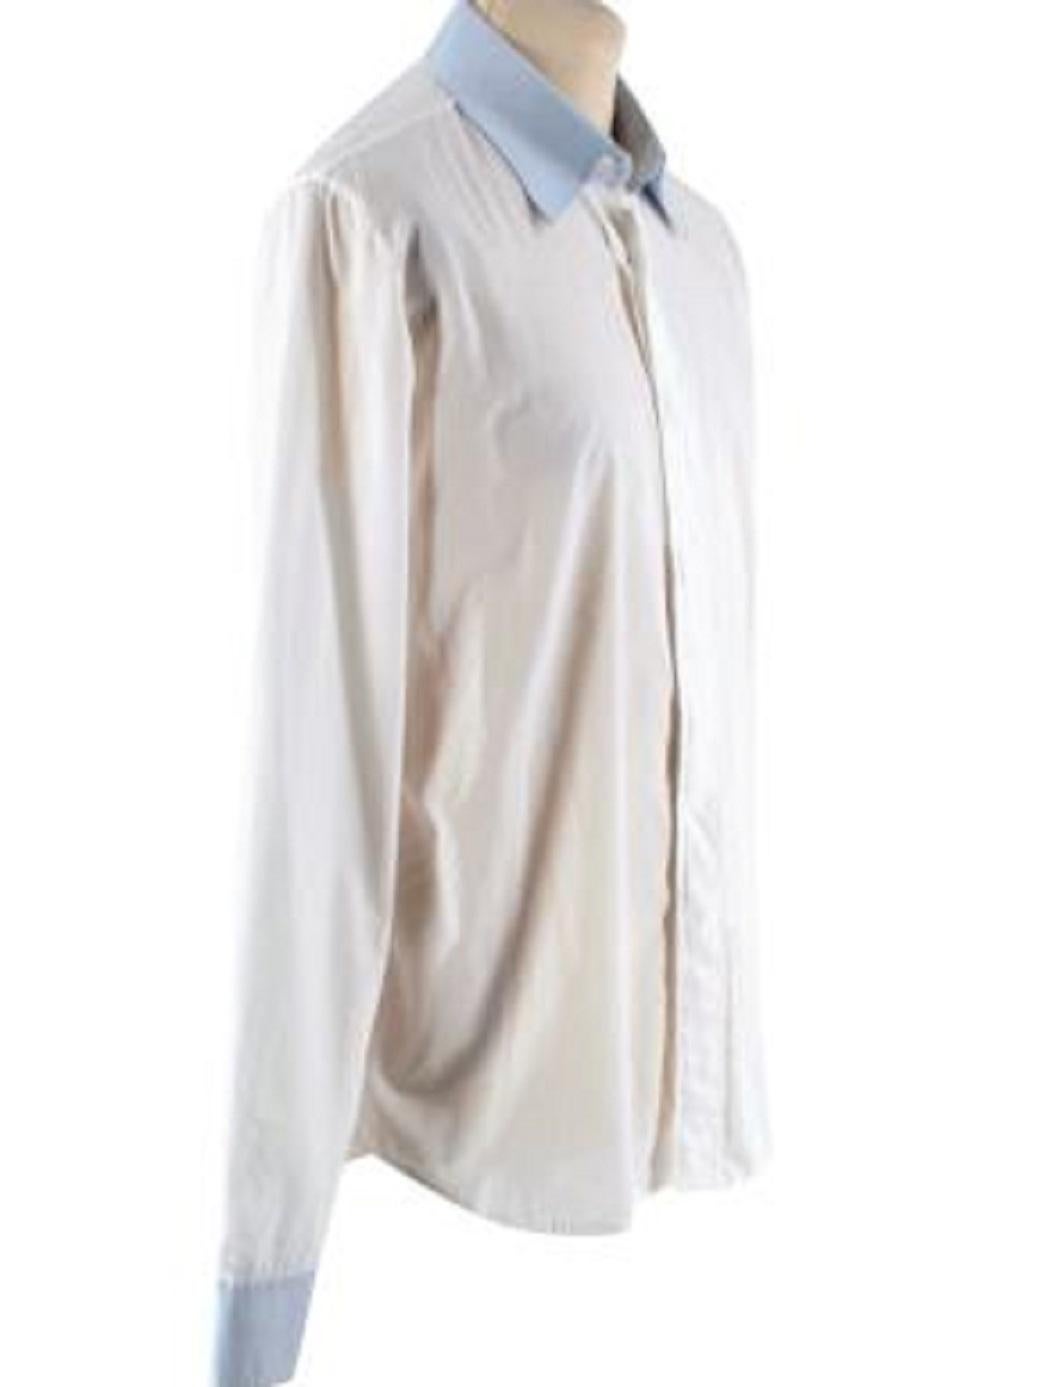 Maison Martin Margiela Cotton Voile White Long Sleeve Shirt

-Made of super soft and lightweight cotton voile 
-Gorgeous blue details to the collar and cuffs 
-Classic cut 
-Concealed button fastening to the front 
-Buttoned cuffs 
-Signature white